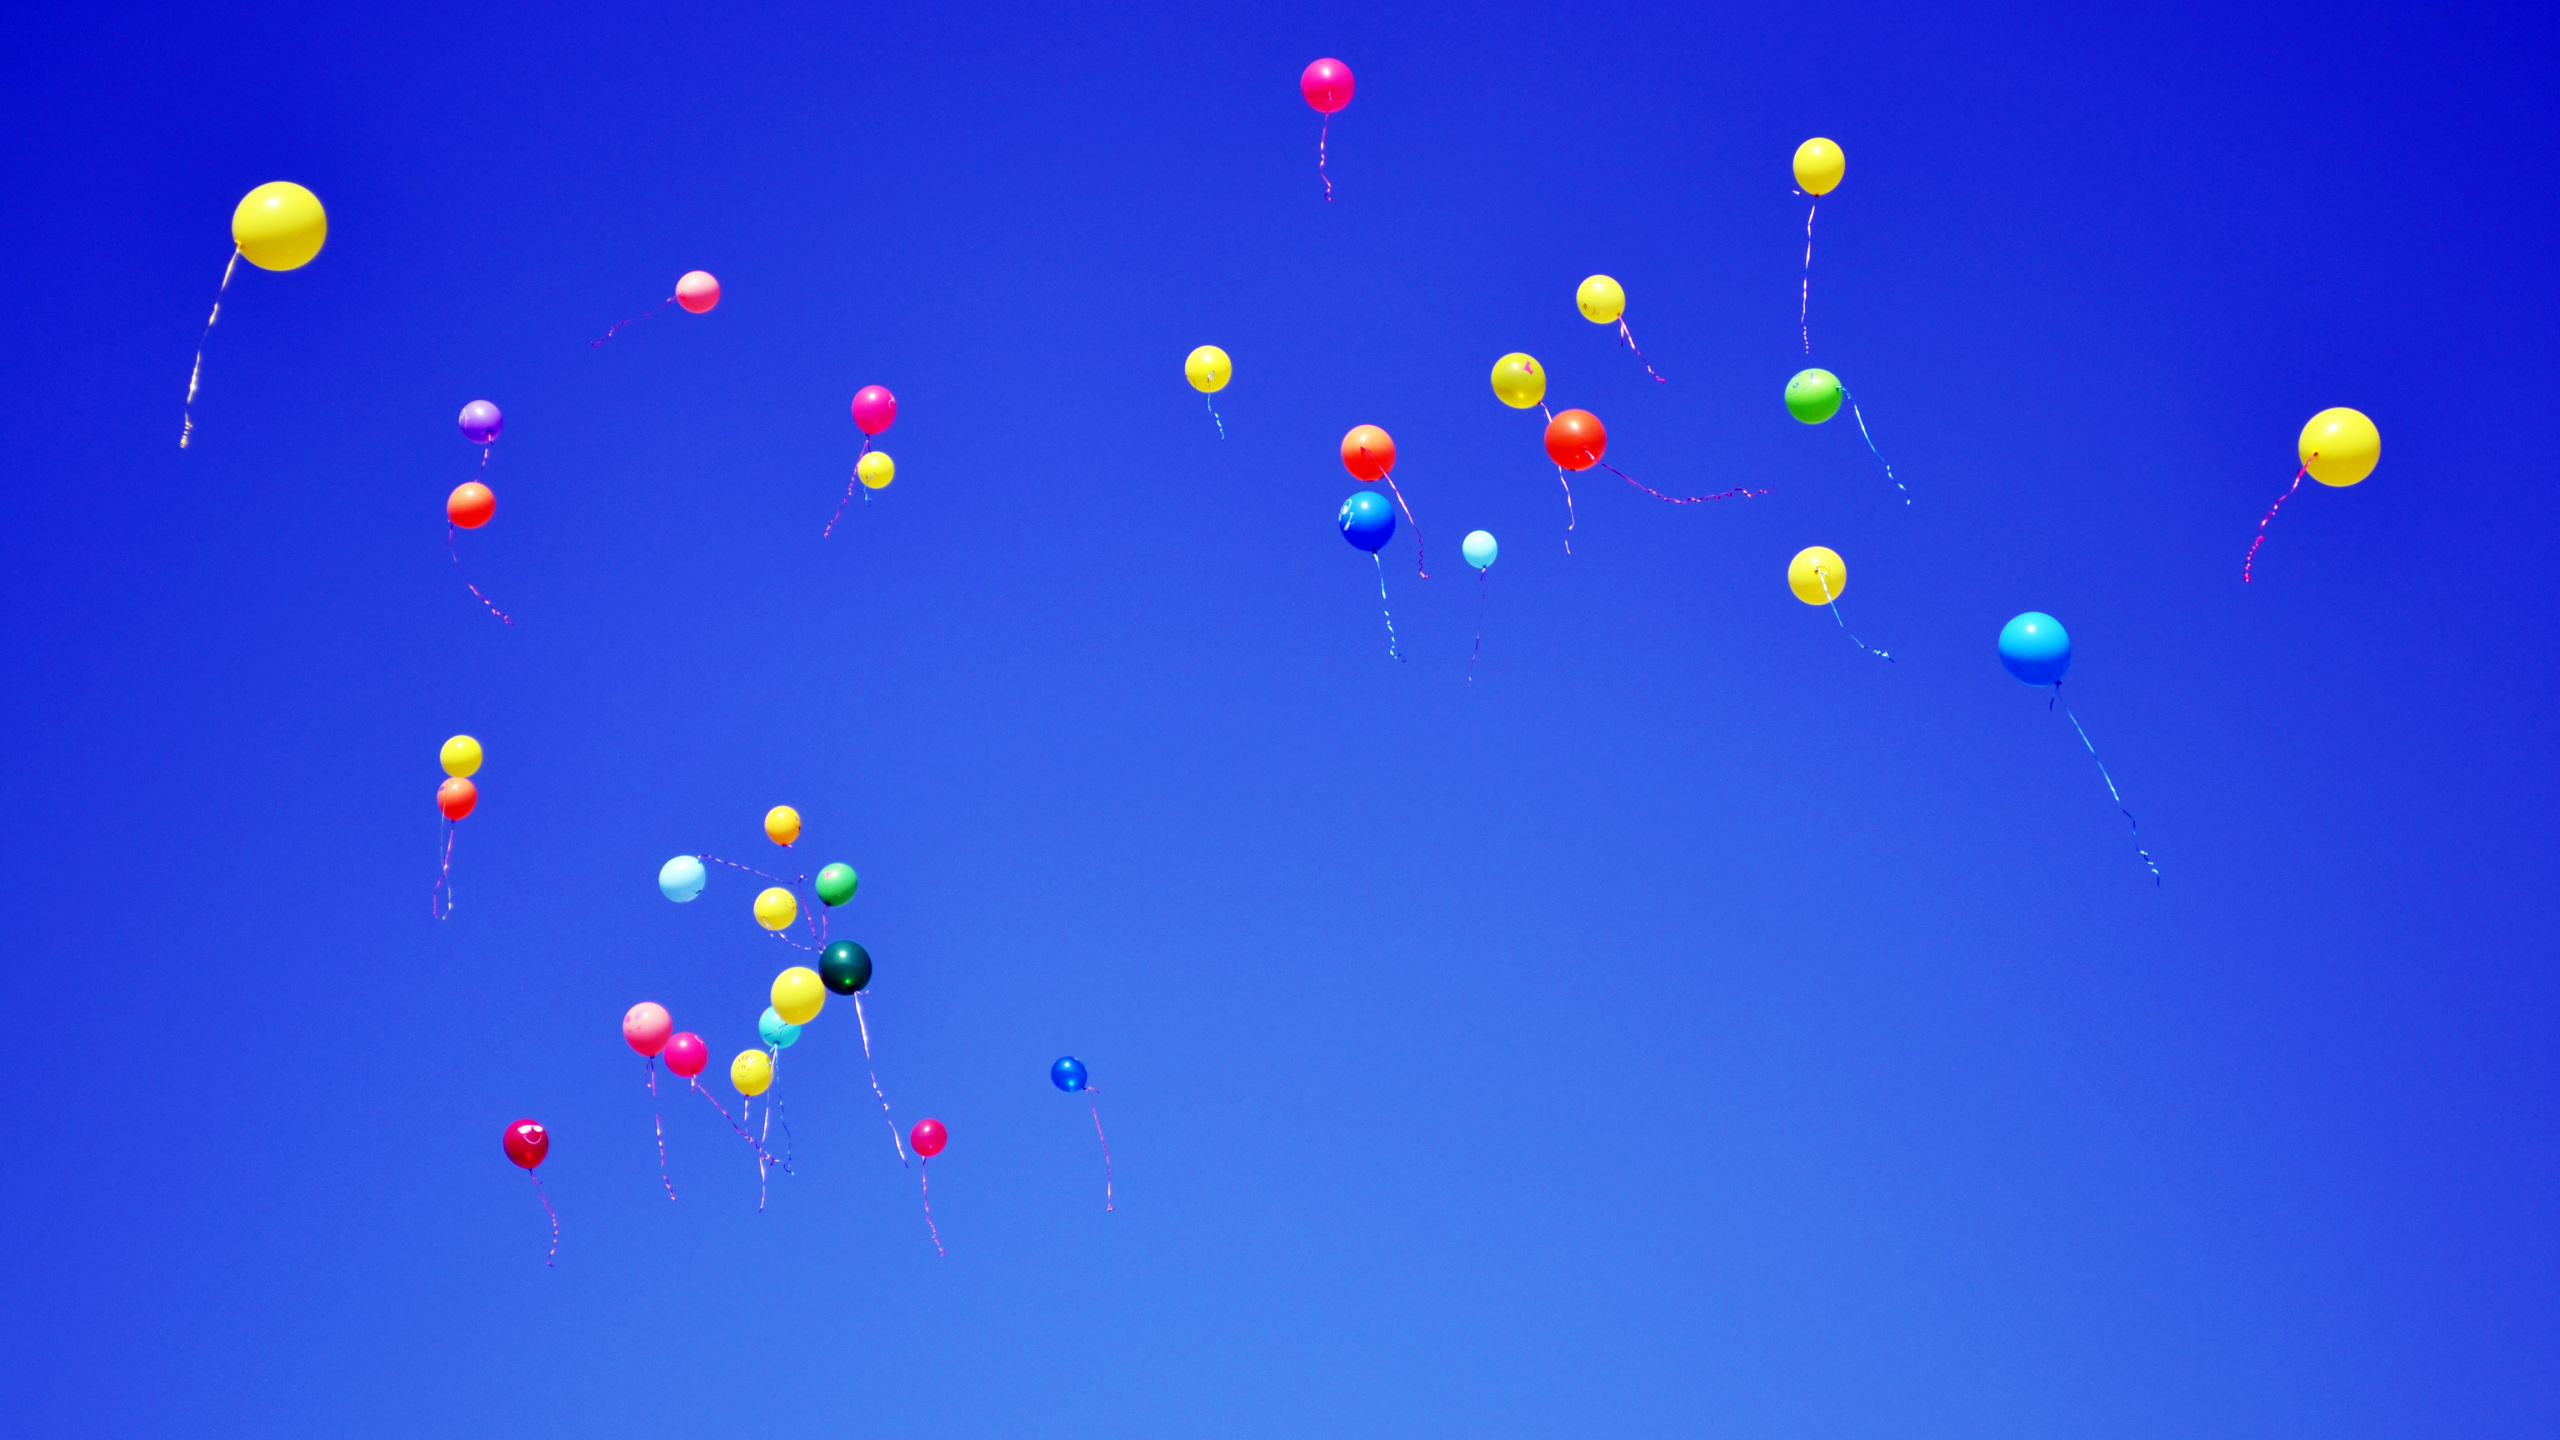 Red Blue and Yellow Balloons in The Sky. Wallpaper in 2560x1440 Resolution